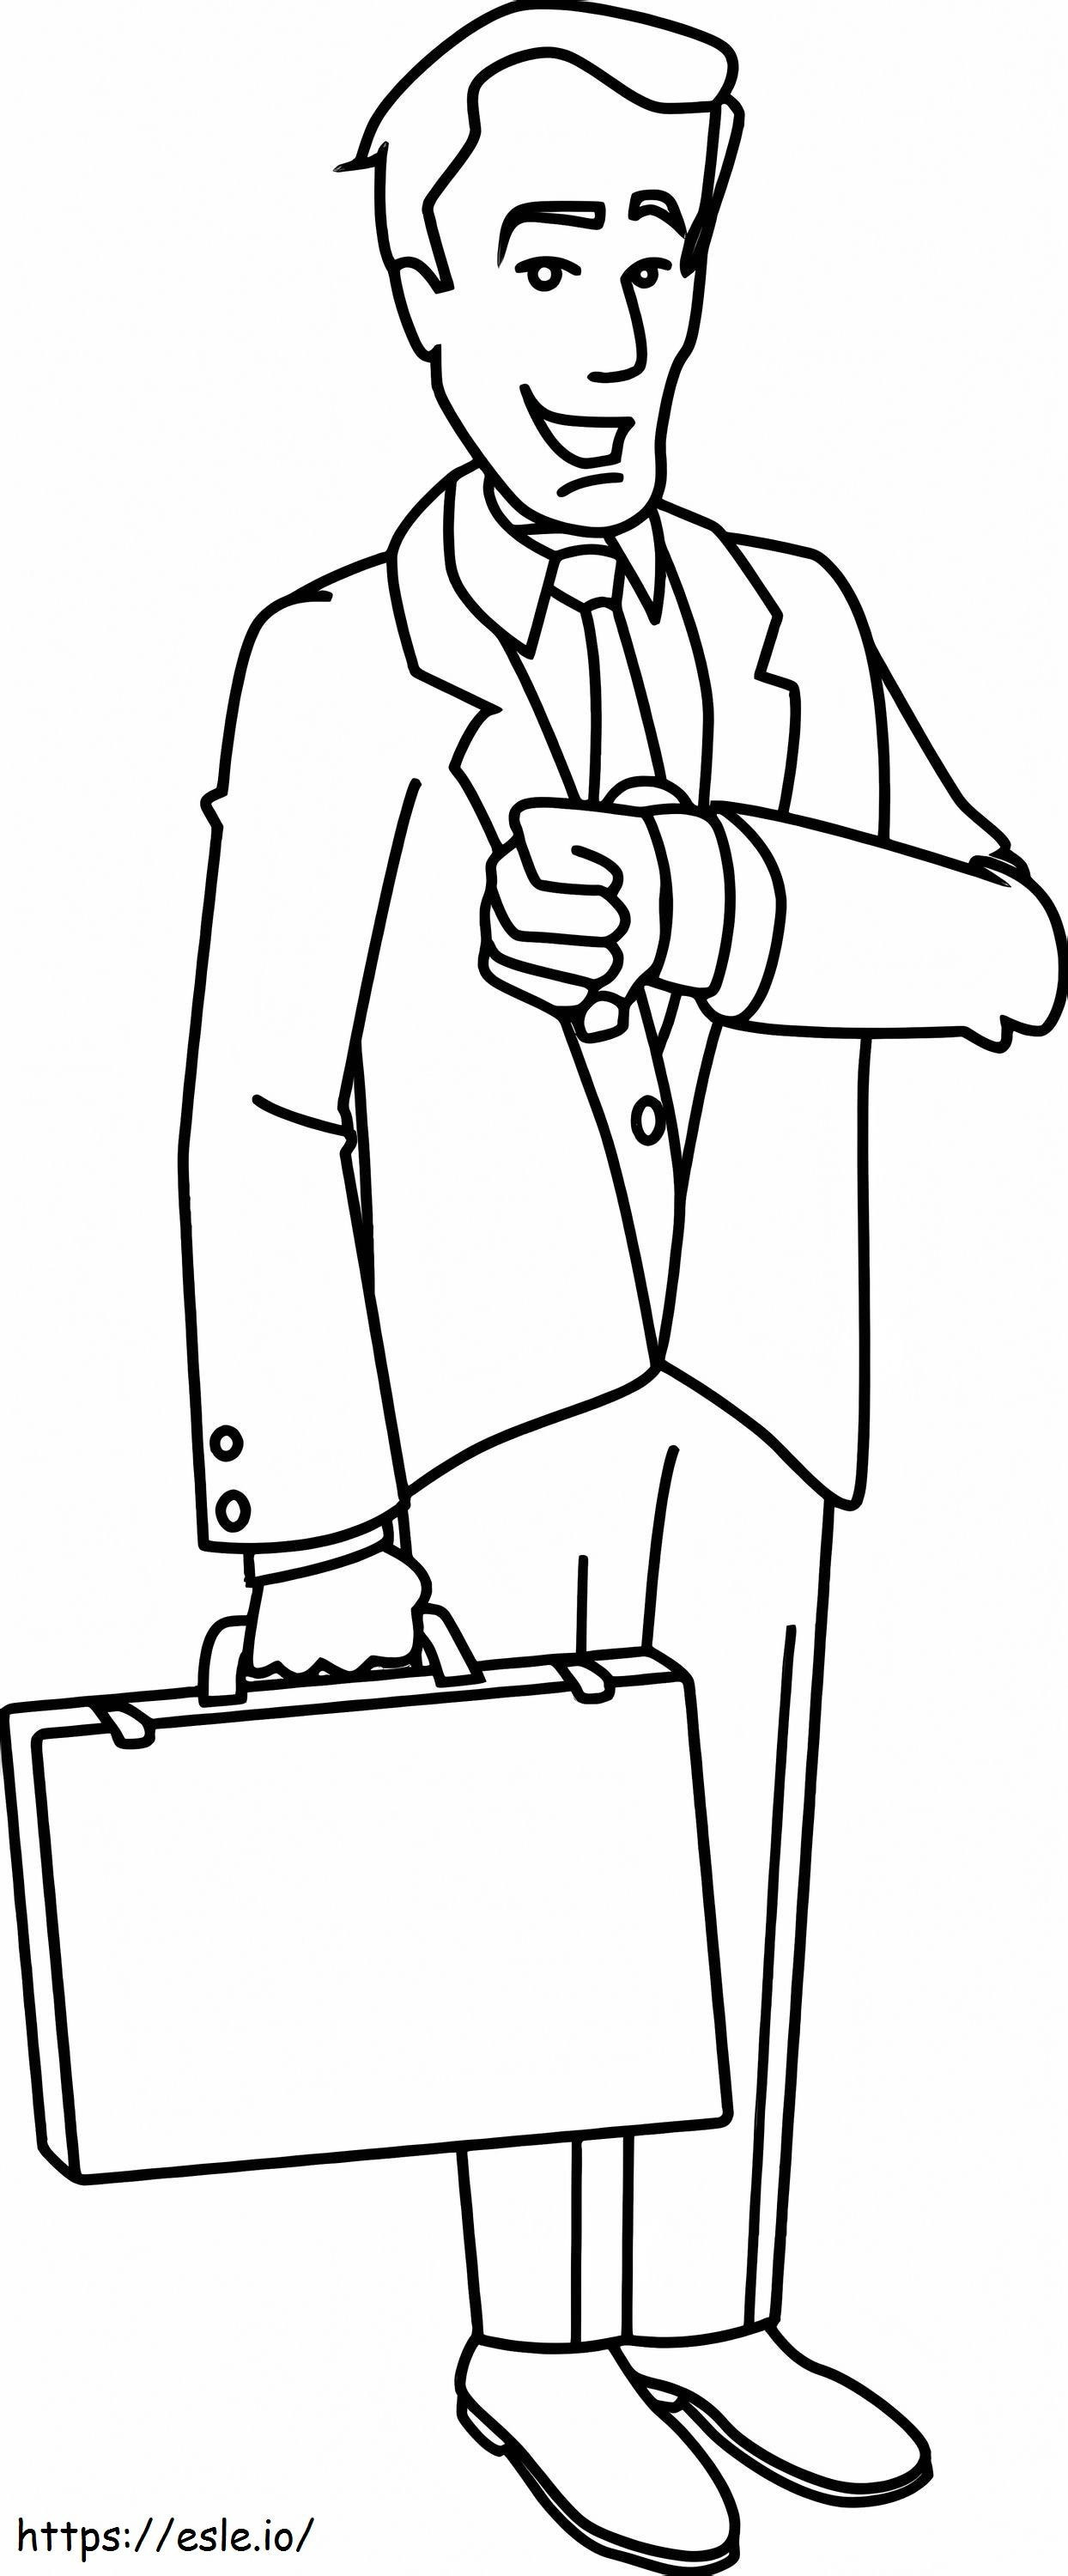 Businessman Looking At His Watch coloring page